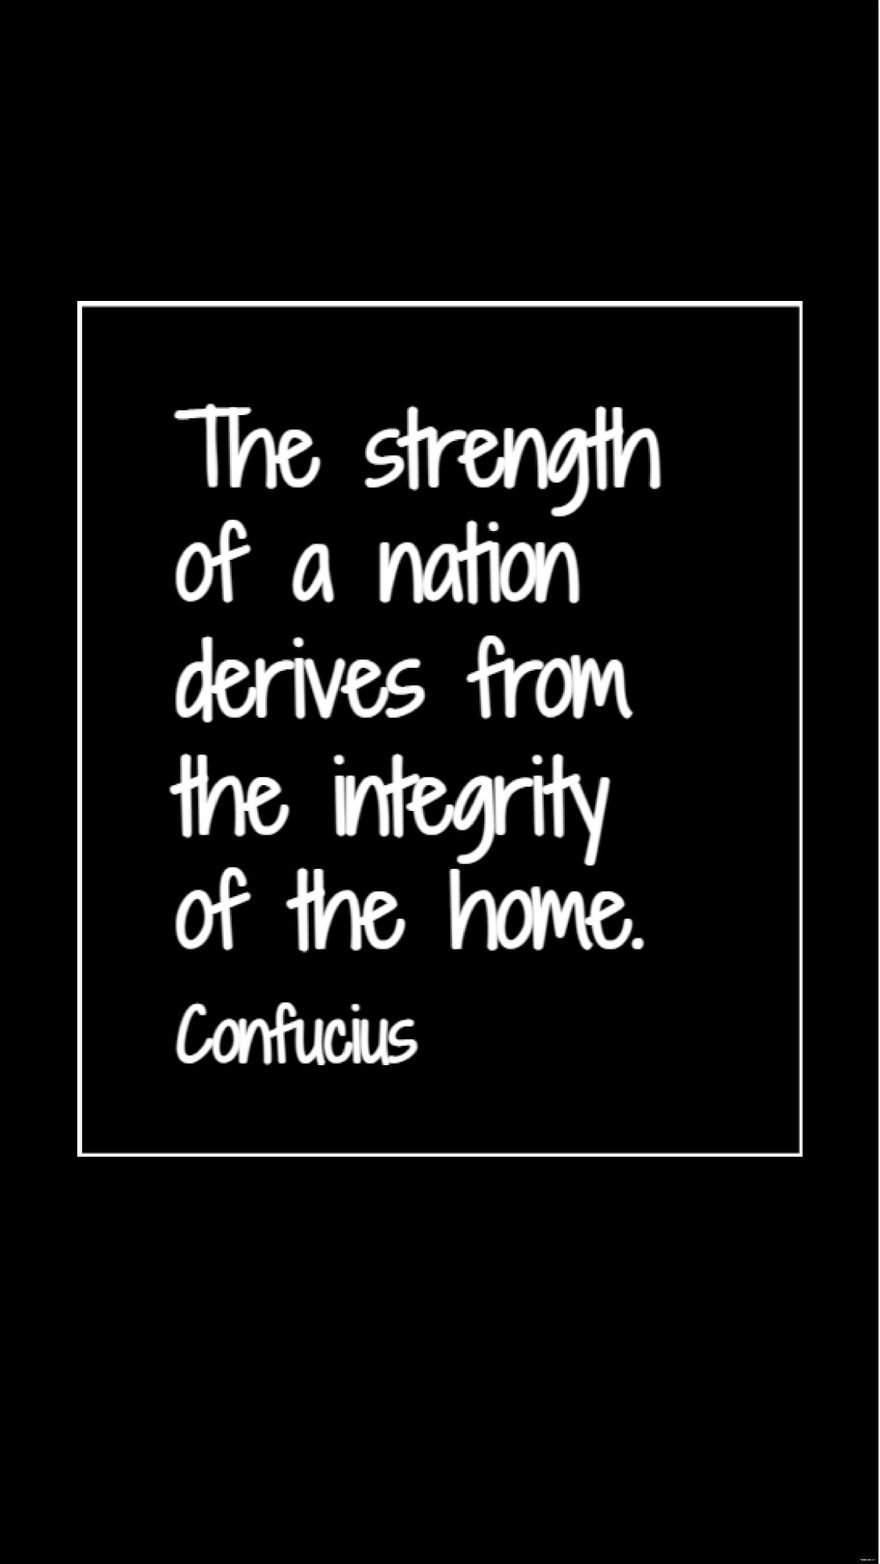 Confucius - The strength of a nation derives from the integrity of the home.